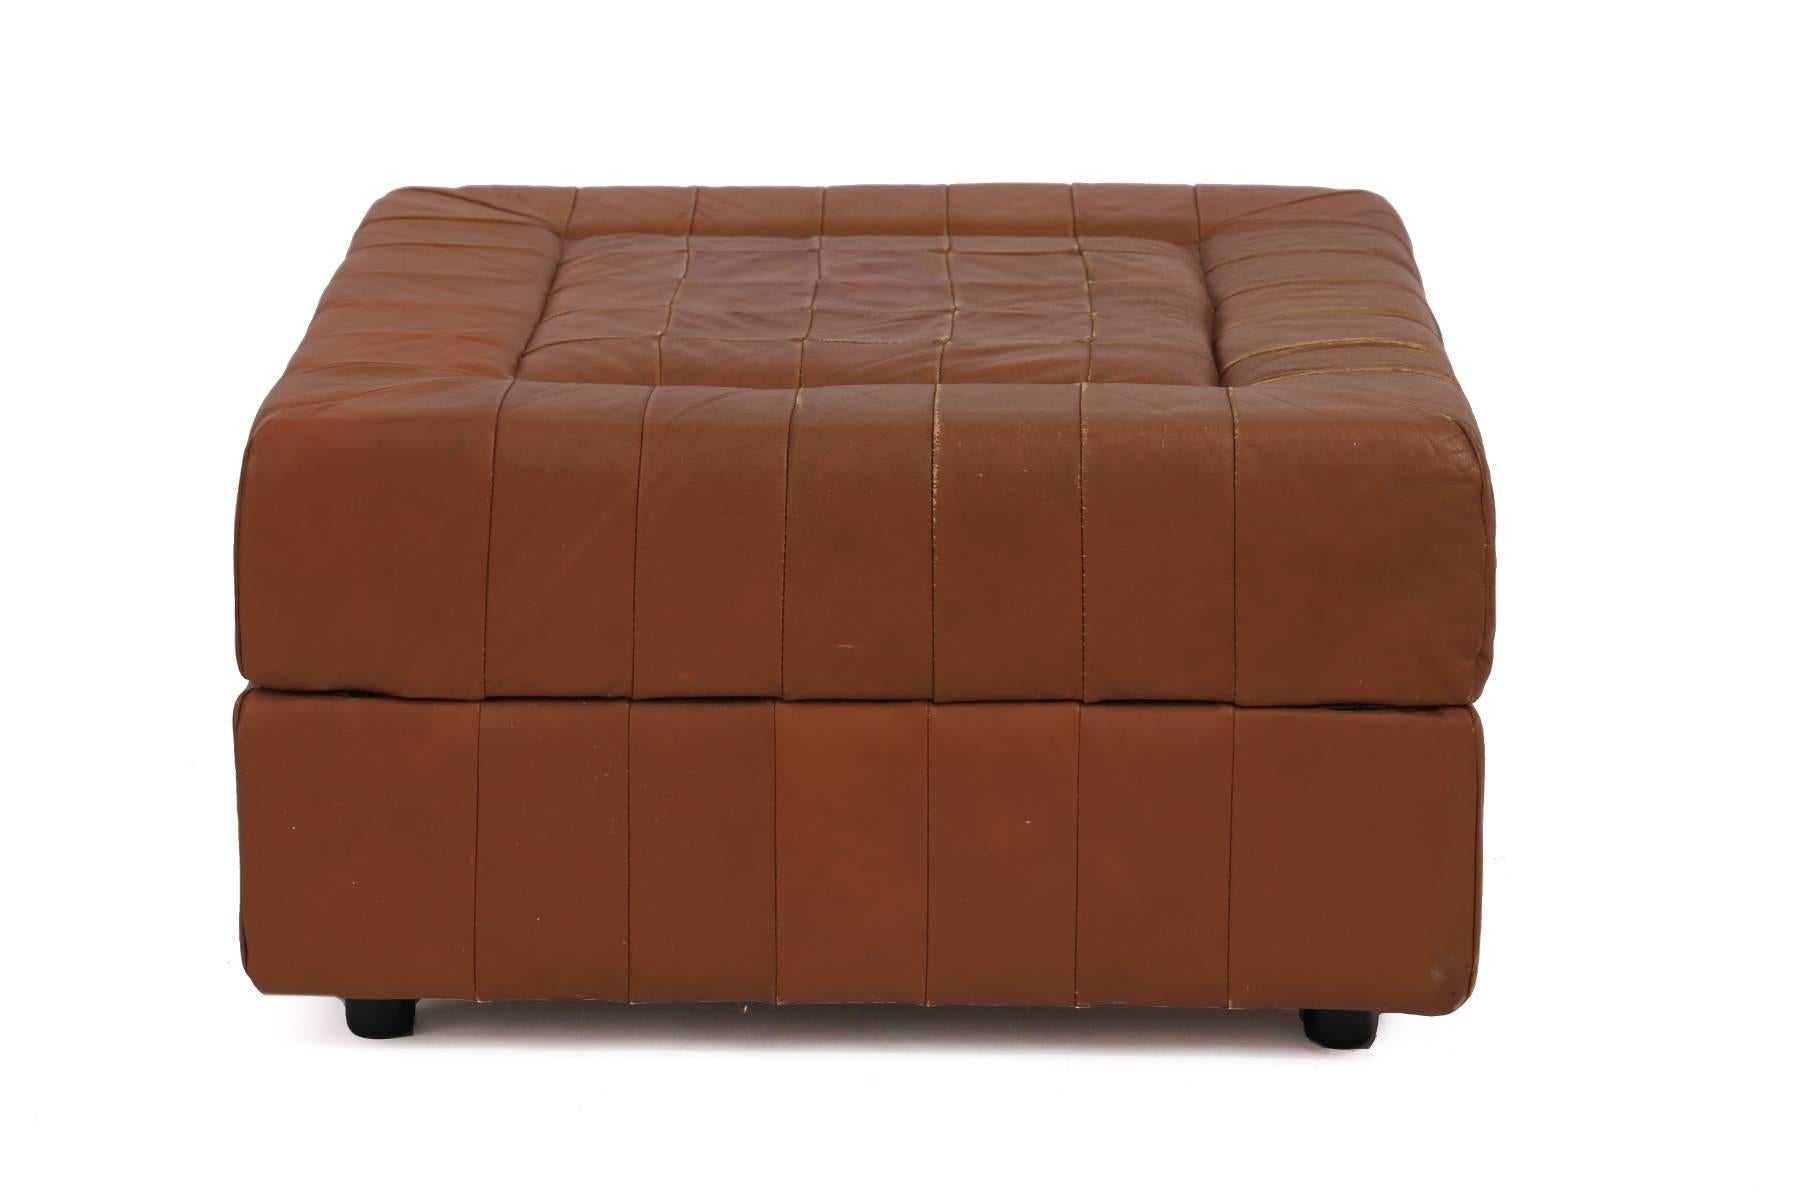 Late 20th Century Percival Lafer Patchwork Leather Sofa